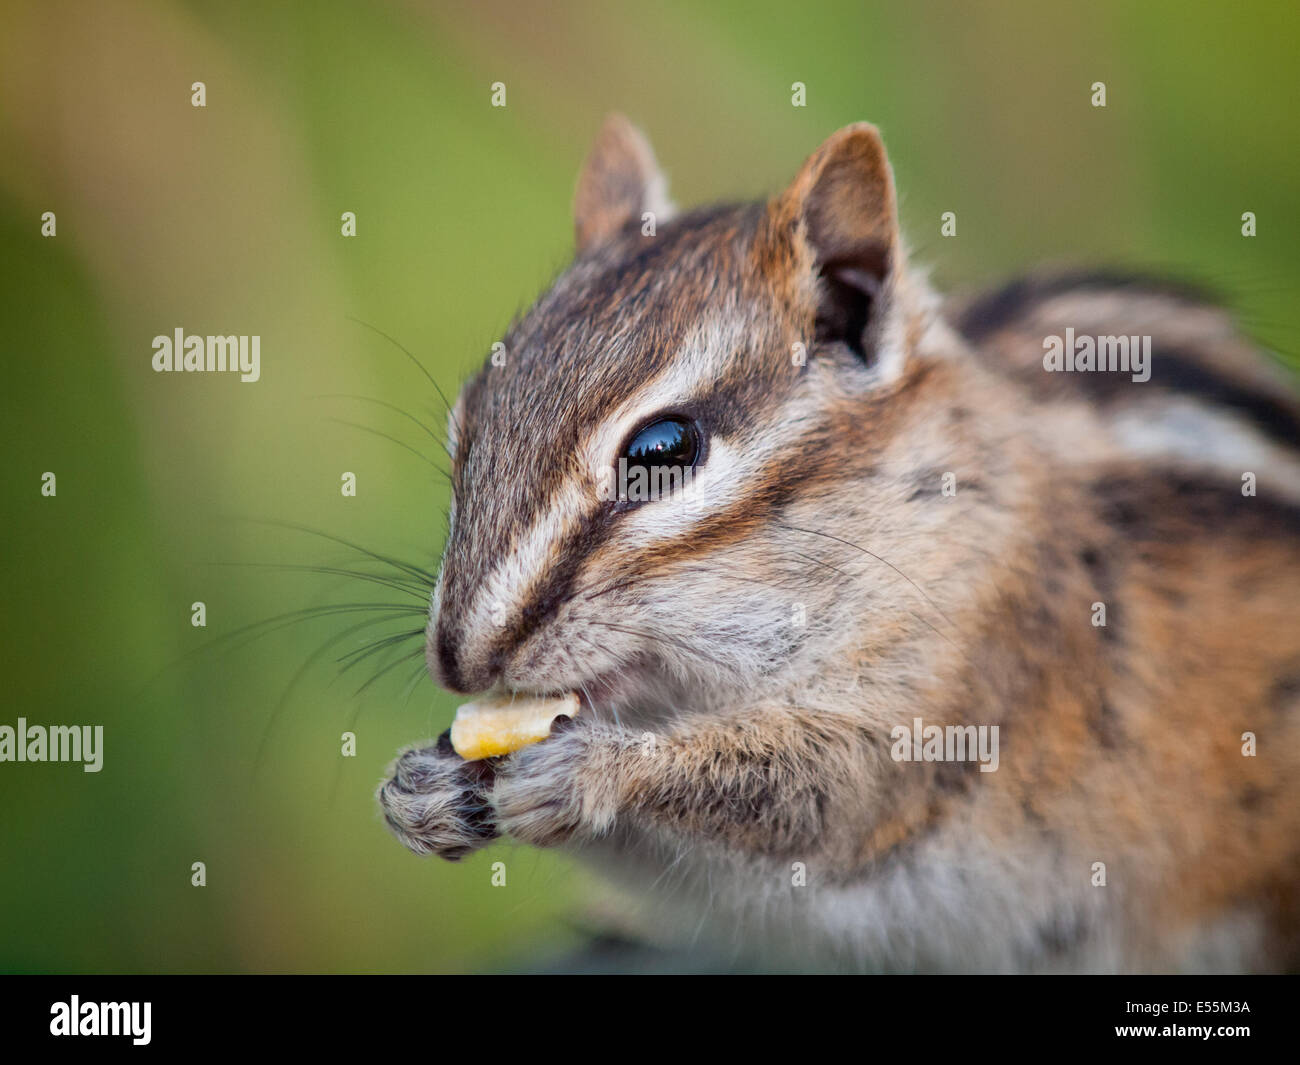 A close-up of a cute Least Chipmunk (Tamias minimus) feeding on seeds.  Whitemud Park and Nature Reserve, Edmonton, Canada. Stock Photo